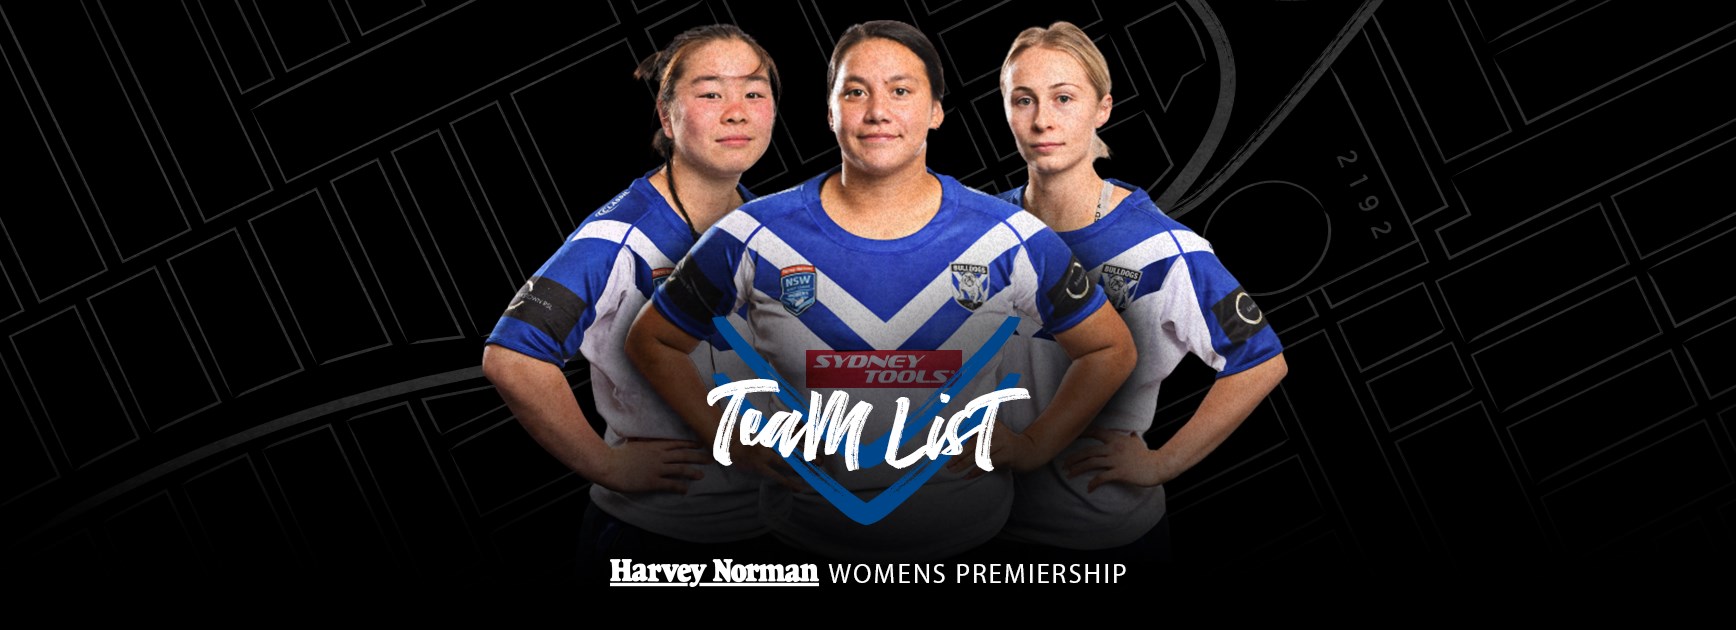 Bulldogs women's side named to face Magpies